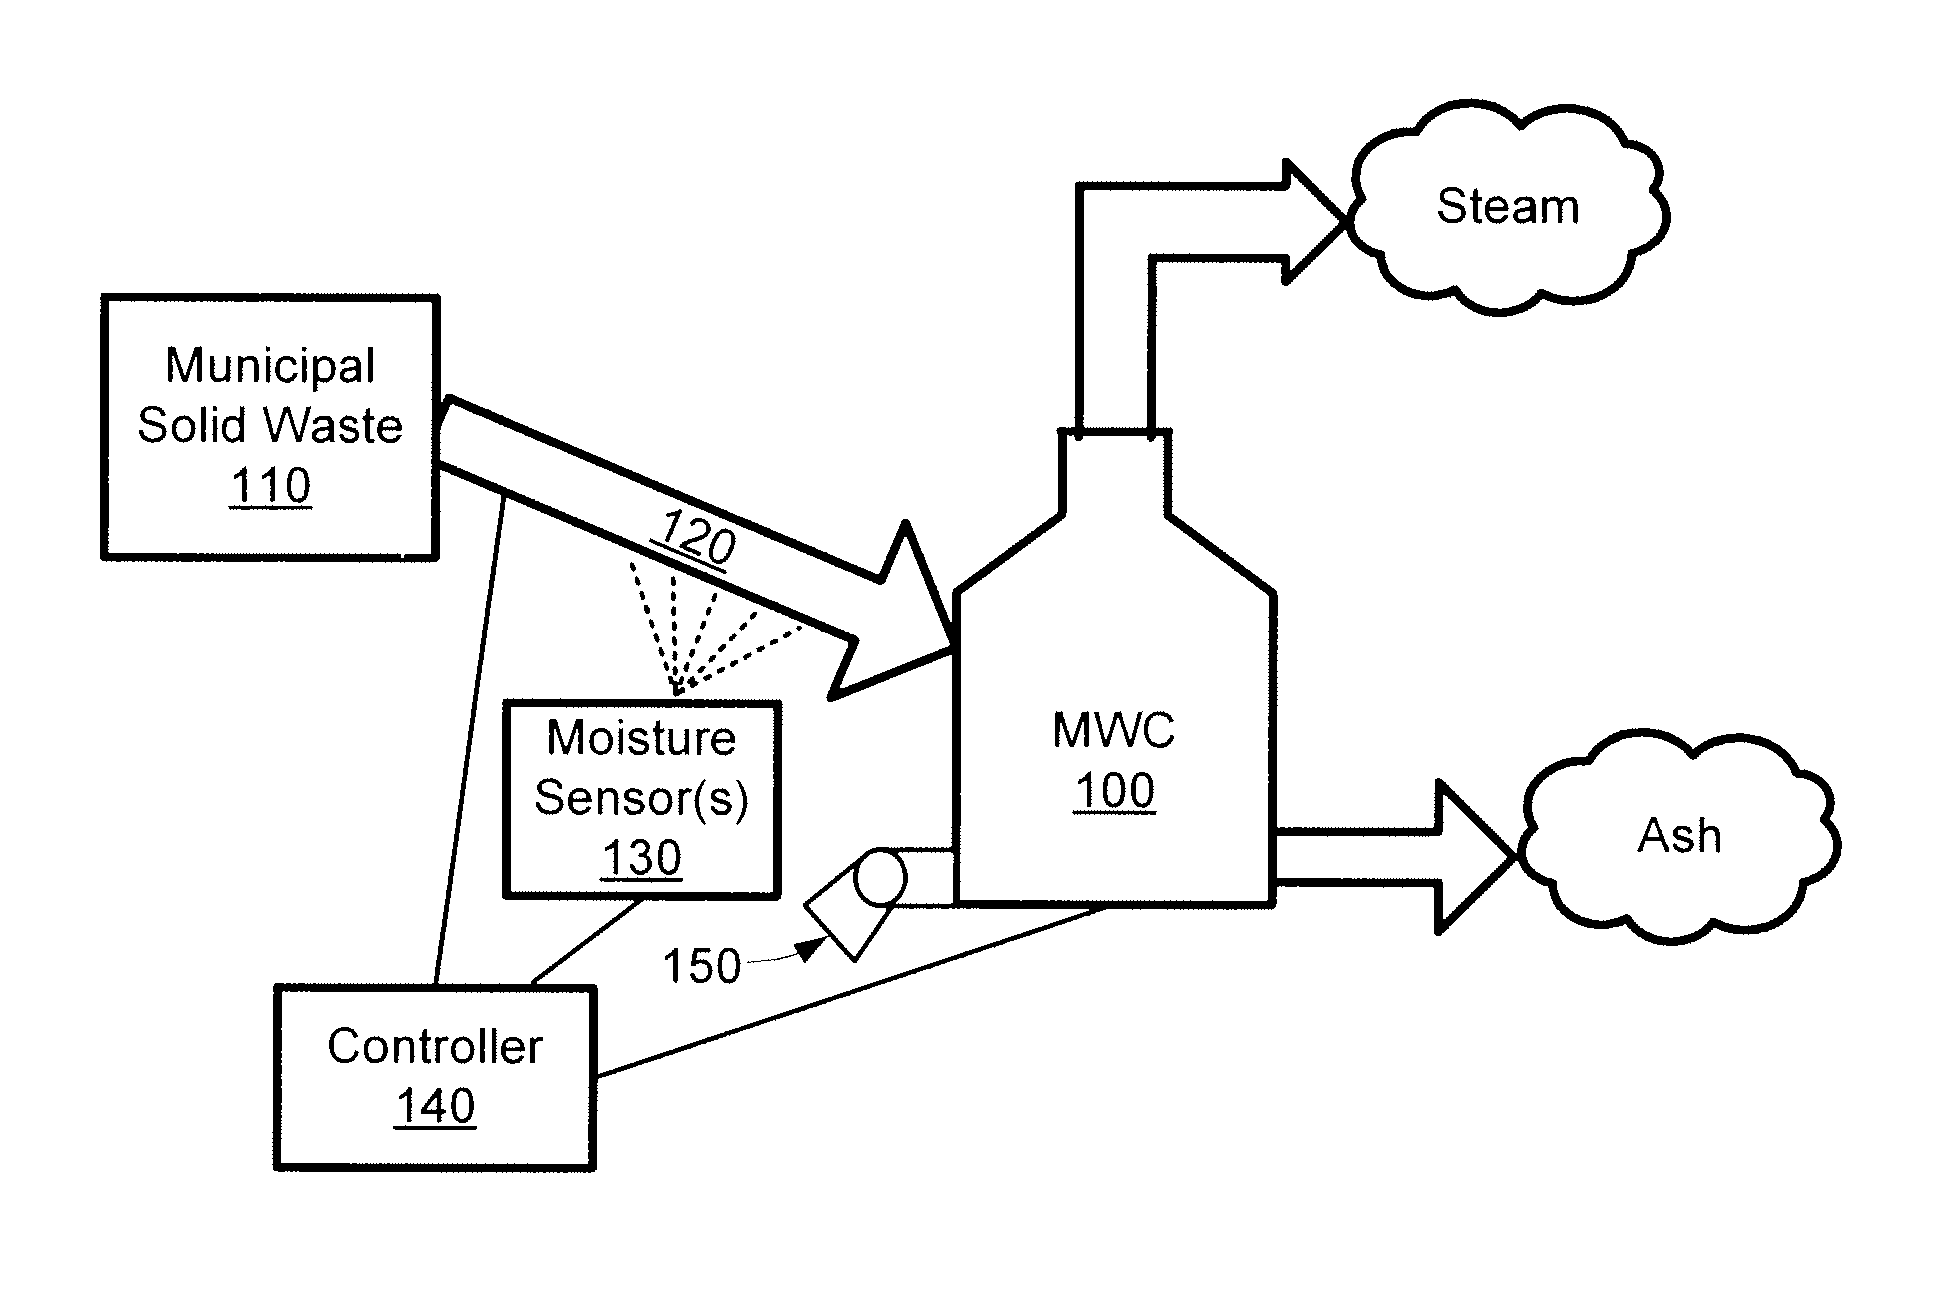 Method and systems to control municipal solid waste density and higher heating value for improved waste-to-energy boiler operation